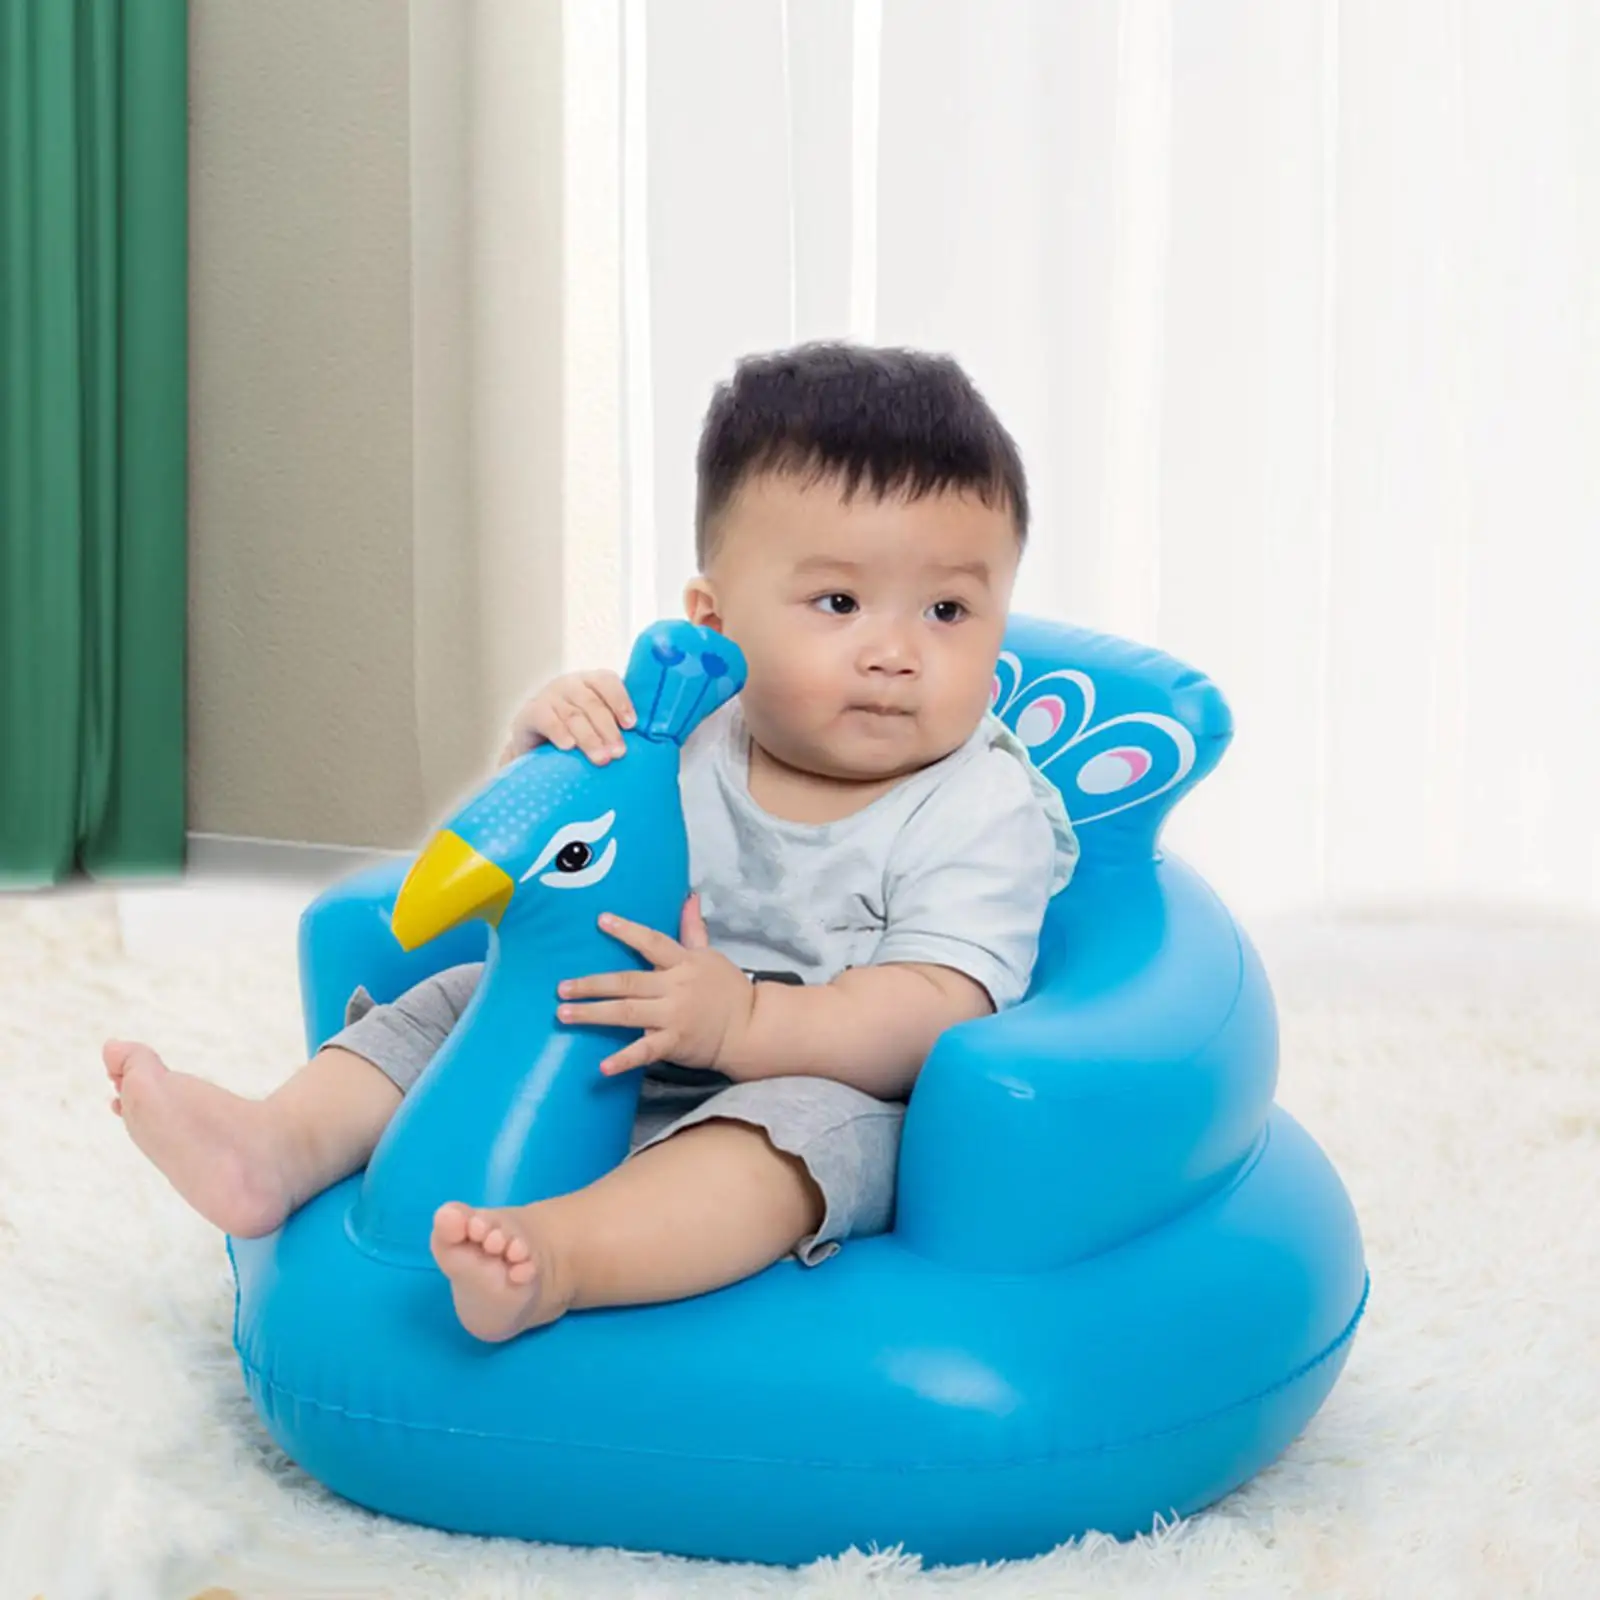 Baby Inflatable Seat Infant Back Support Sofa Floor Seat Playing Game Toy Inflatable Baby Seat for Sitting up Baby Shower Chair